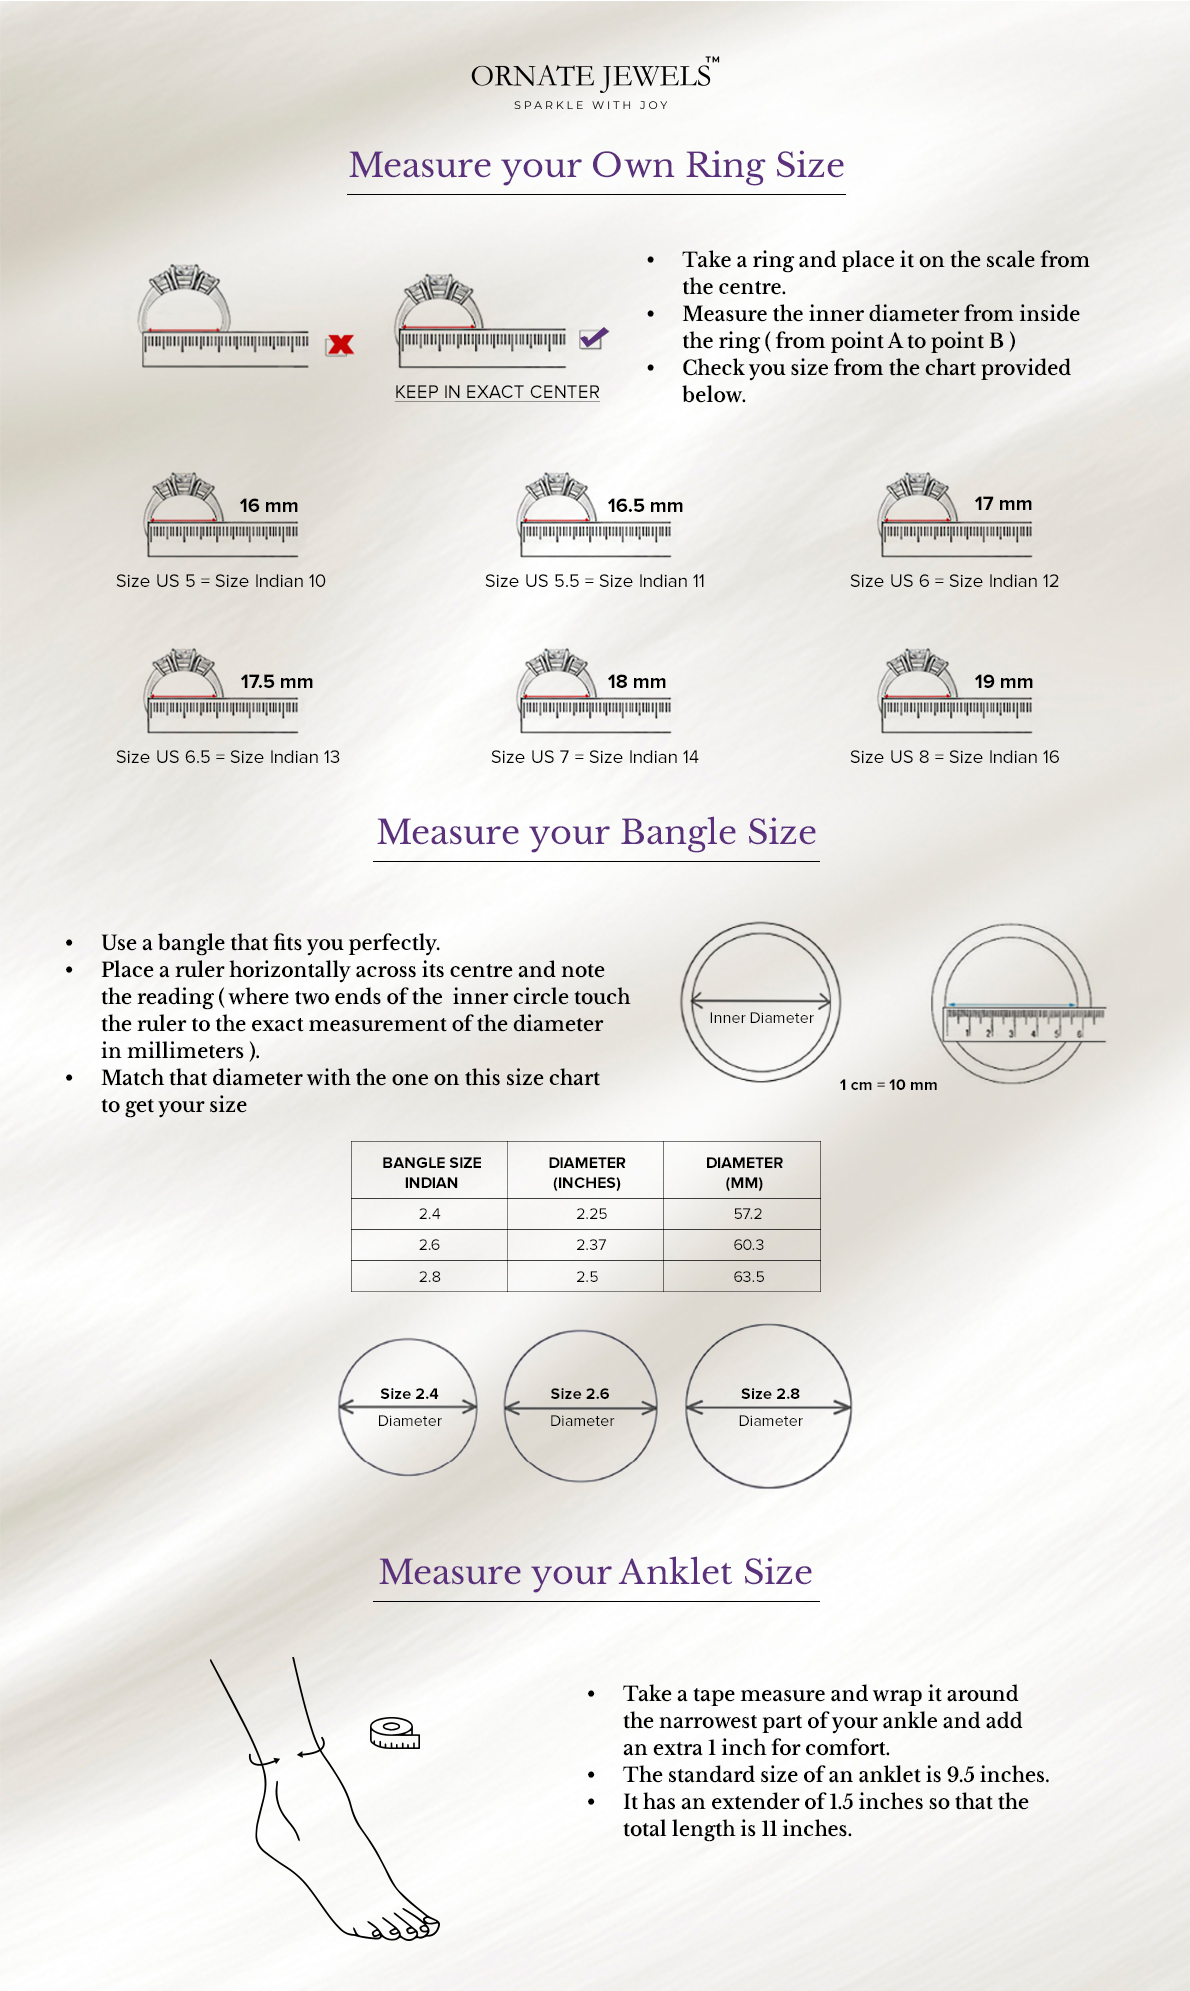 measure your own ring size